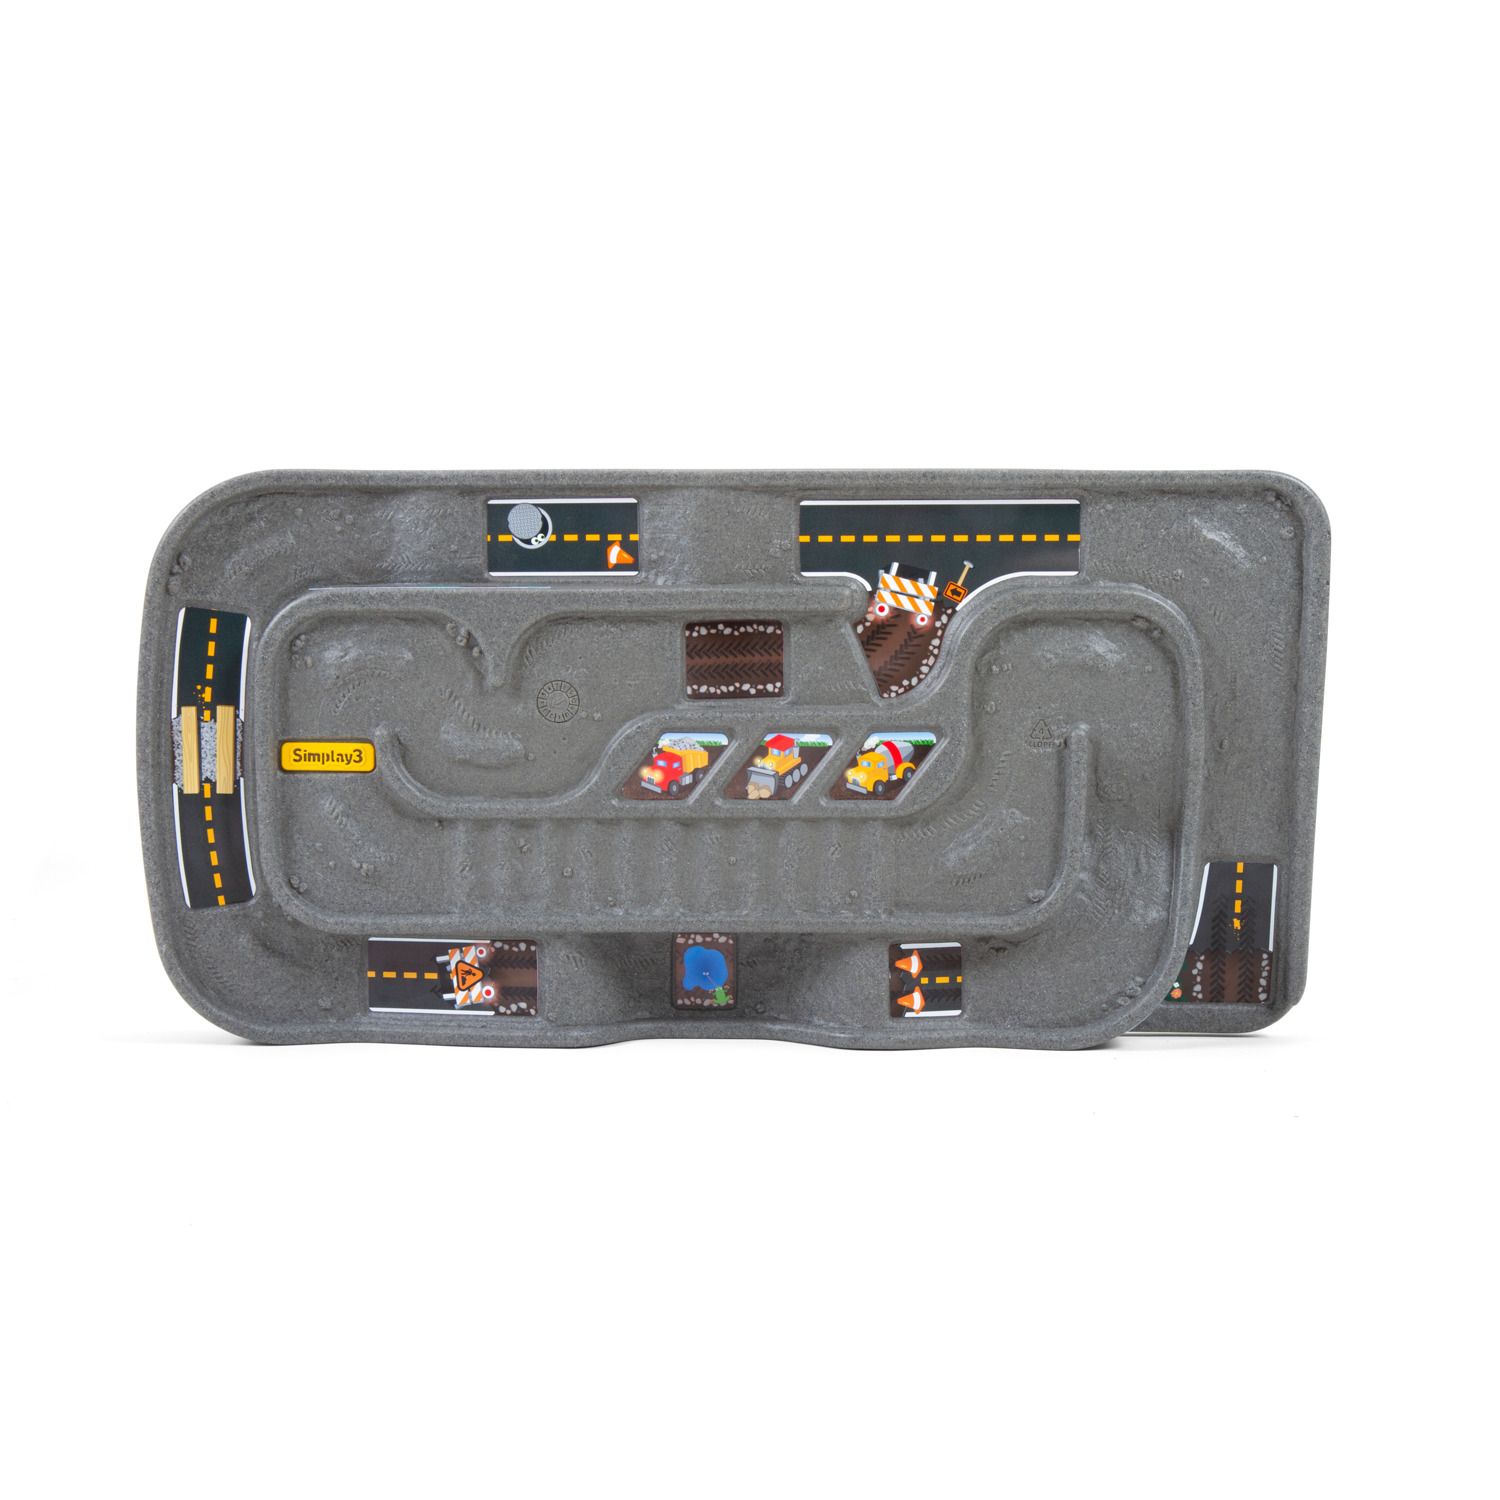 simplay3 carry and go track table